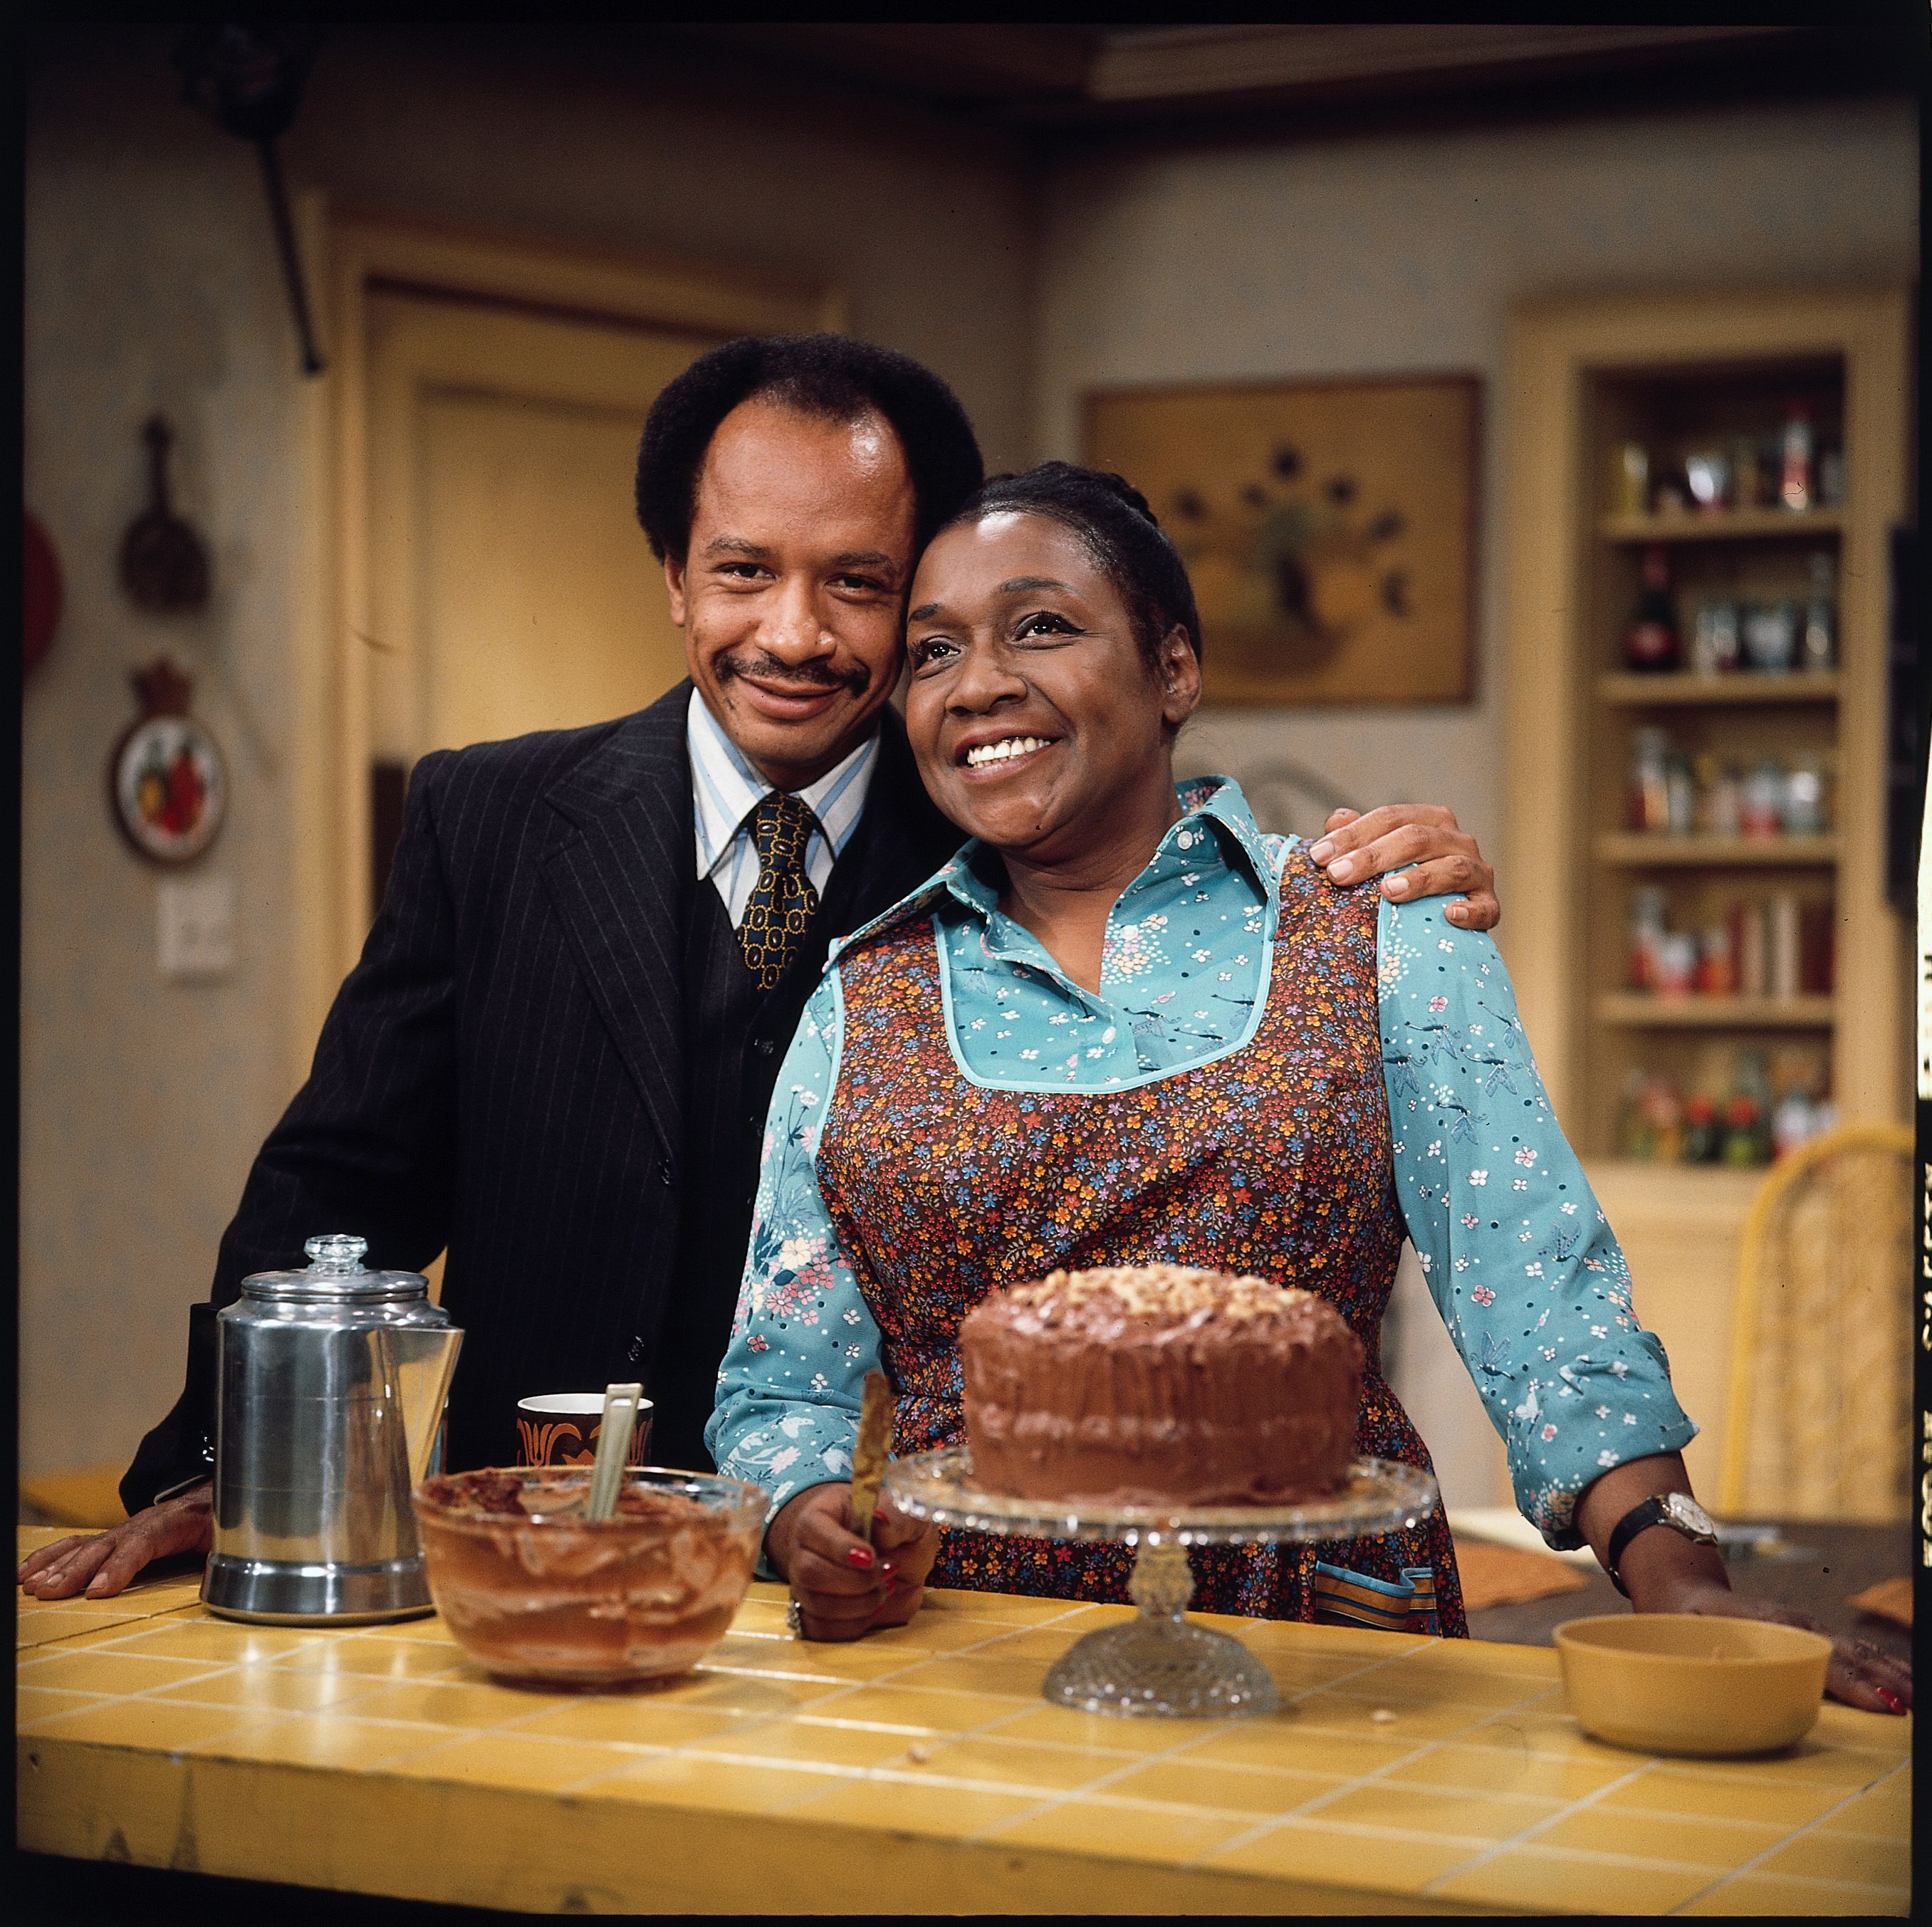 The Jefferson stars Sherman Hemsley and Isabel Sanford| Photo: Getty Images